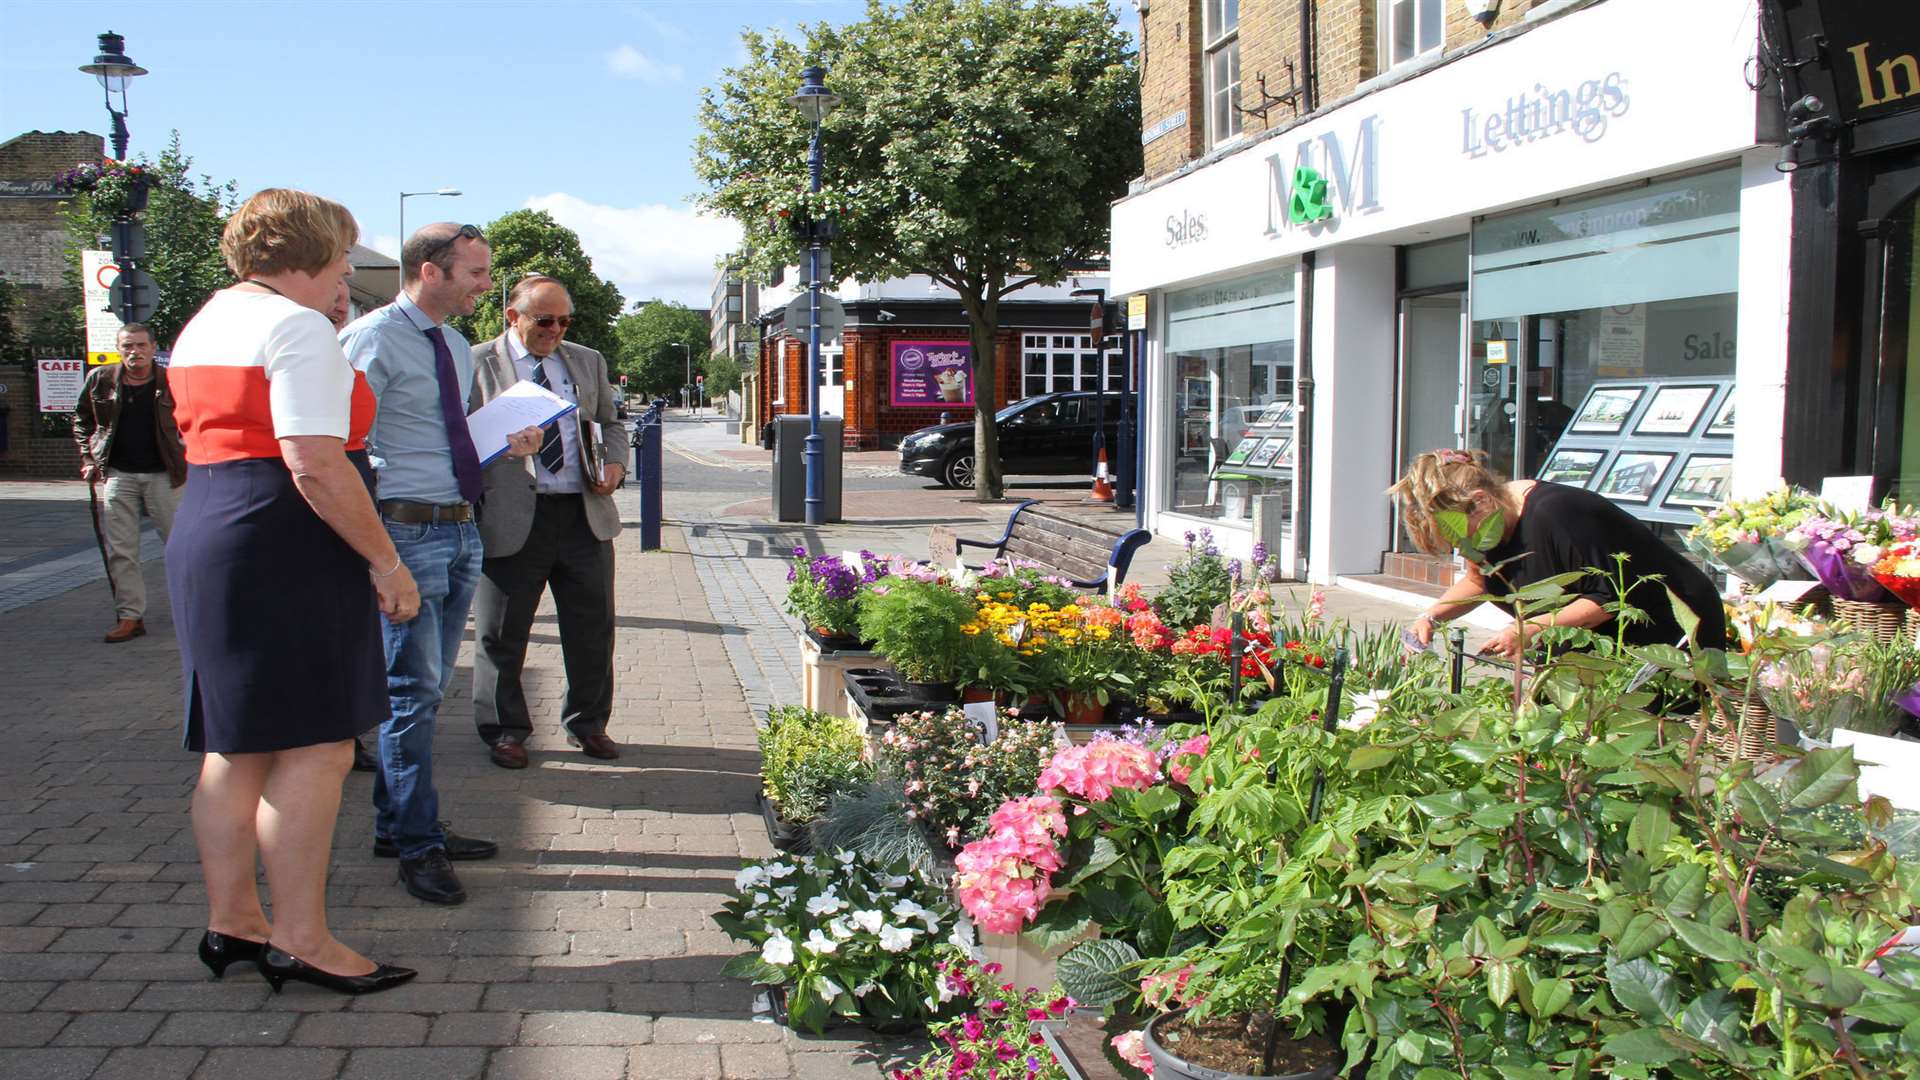 The judges having a look around after the town had a colourful makeover for Gravesham in Bloom 2016